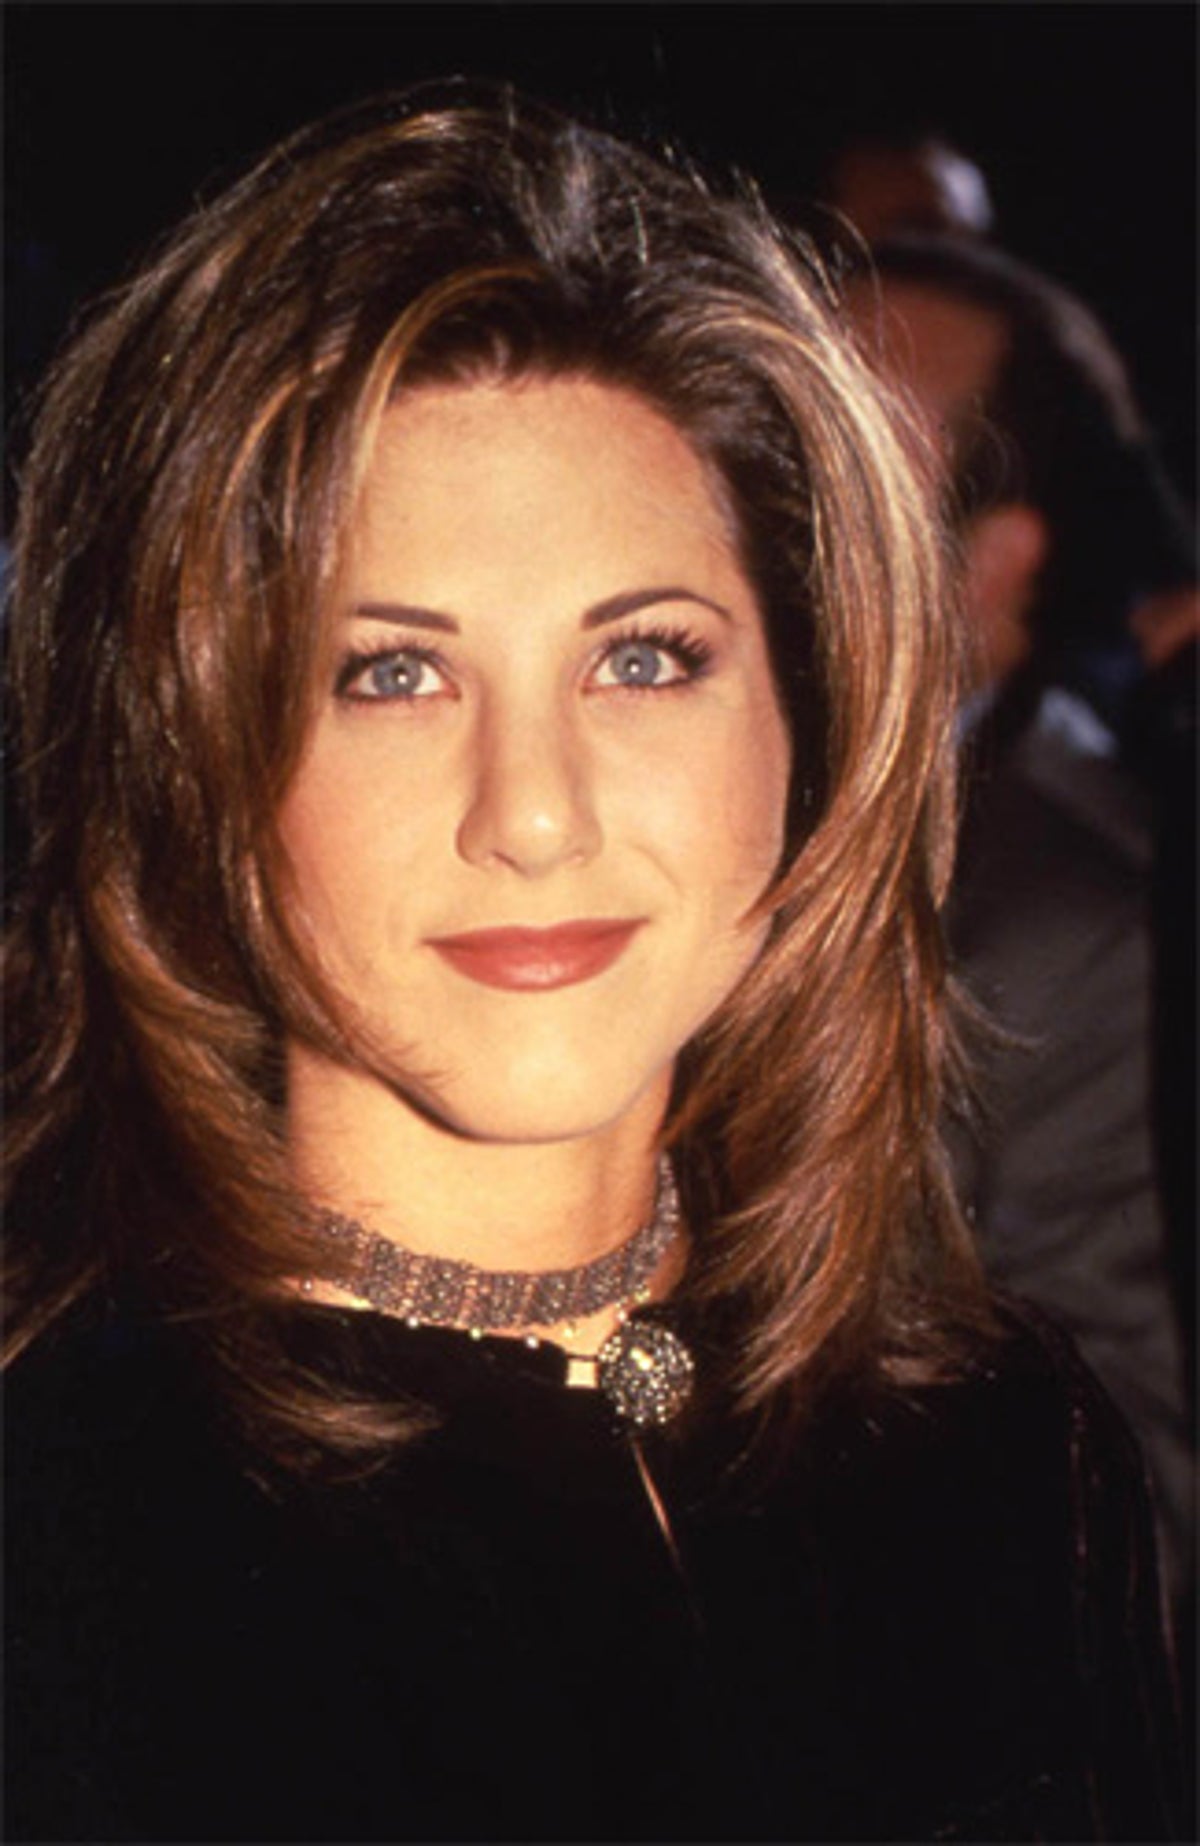 The One Thing Jennifer Aniston Hated About Her Friends Haircut